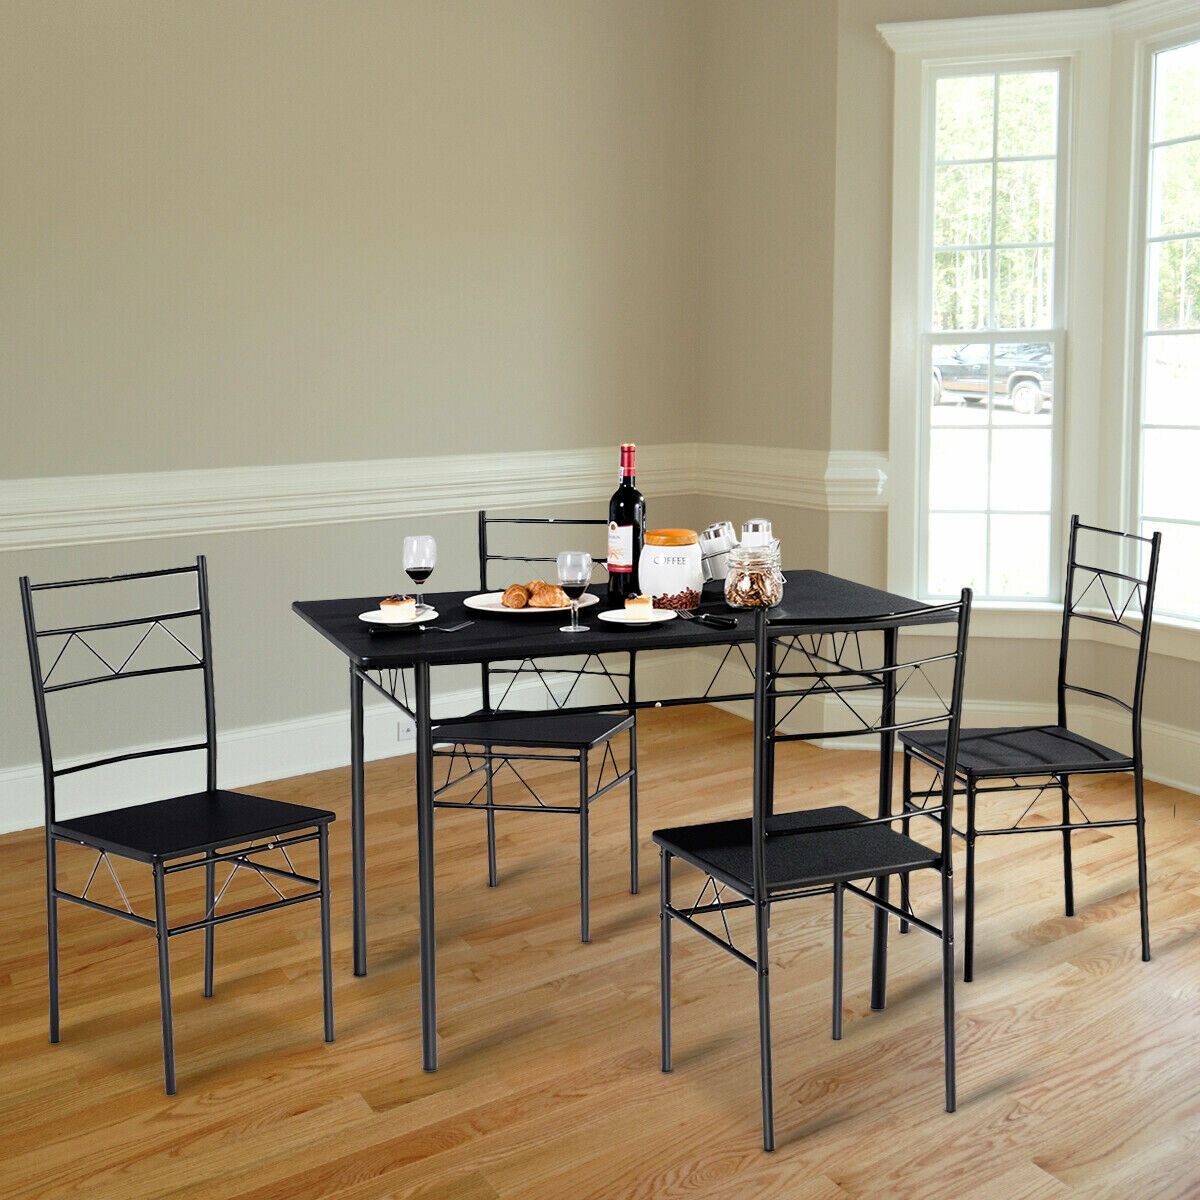 Details About August Grove Helfer 5 Piece Breakfast Nook Dining Set Intended For Best And Newest 5 Piece Breakfast Nook Dining Sets (View 12 of 20)